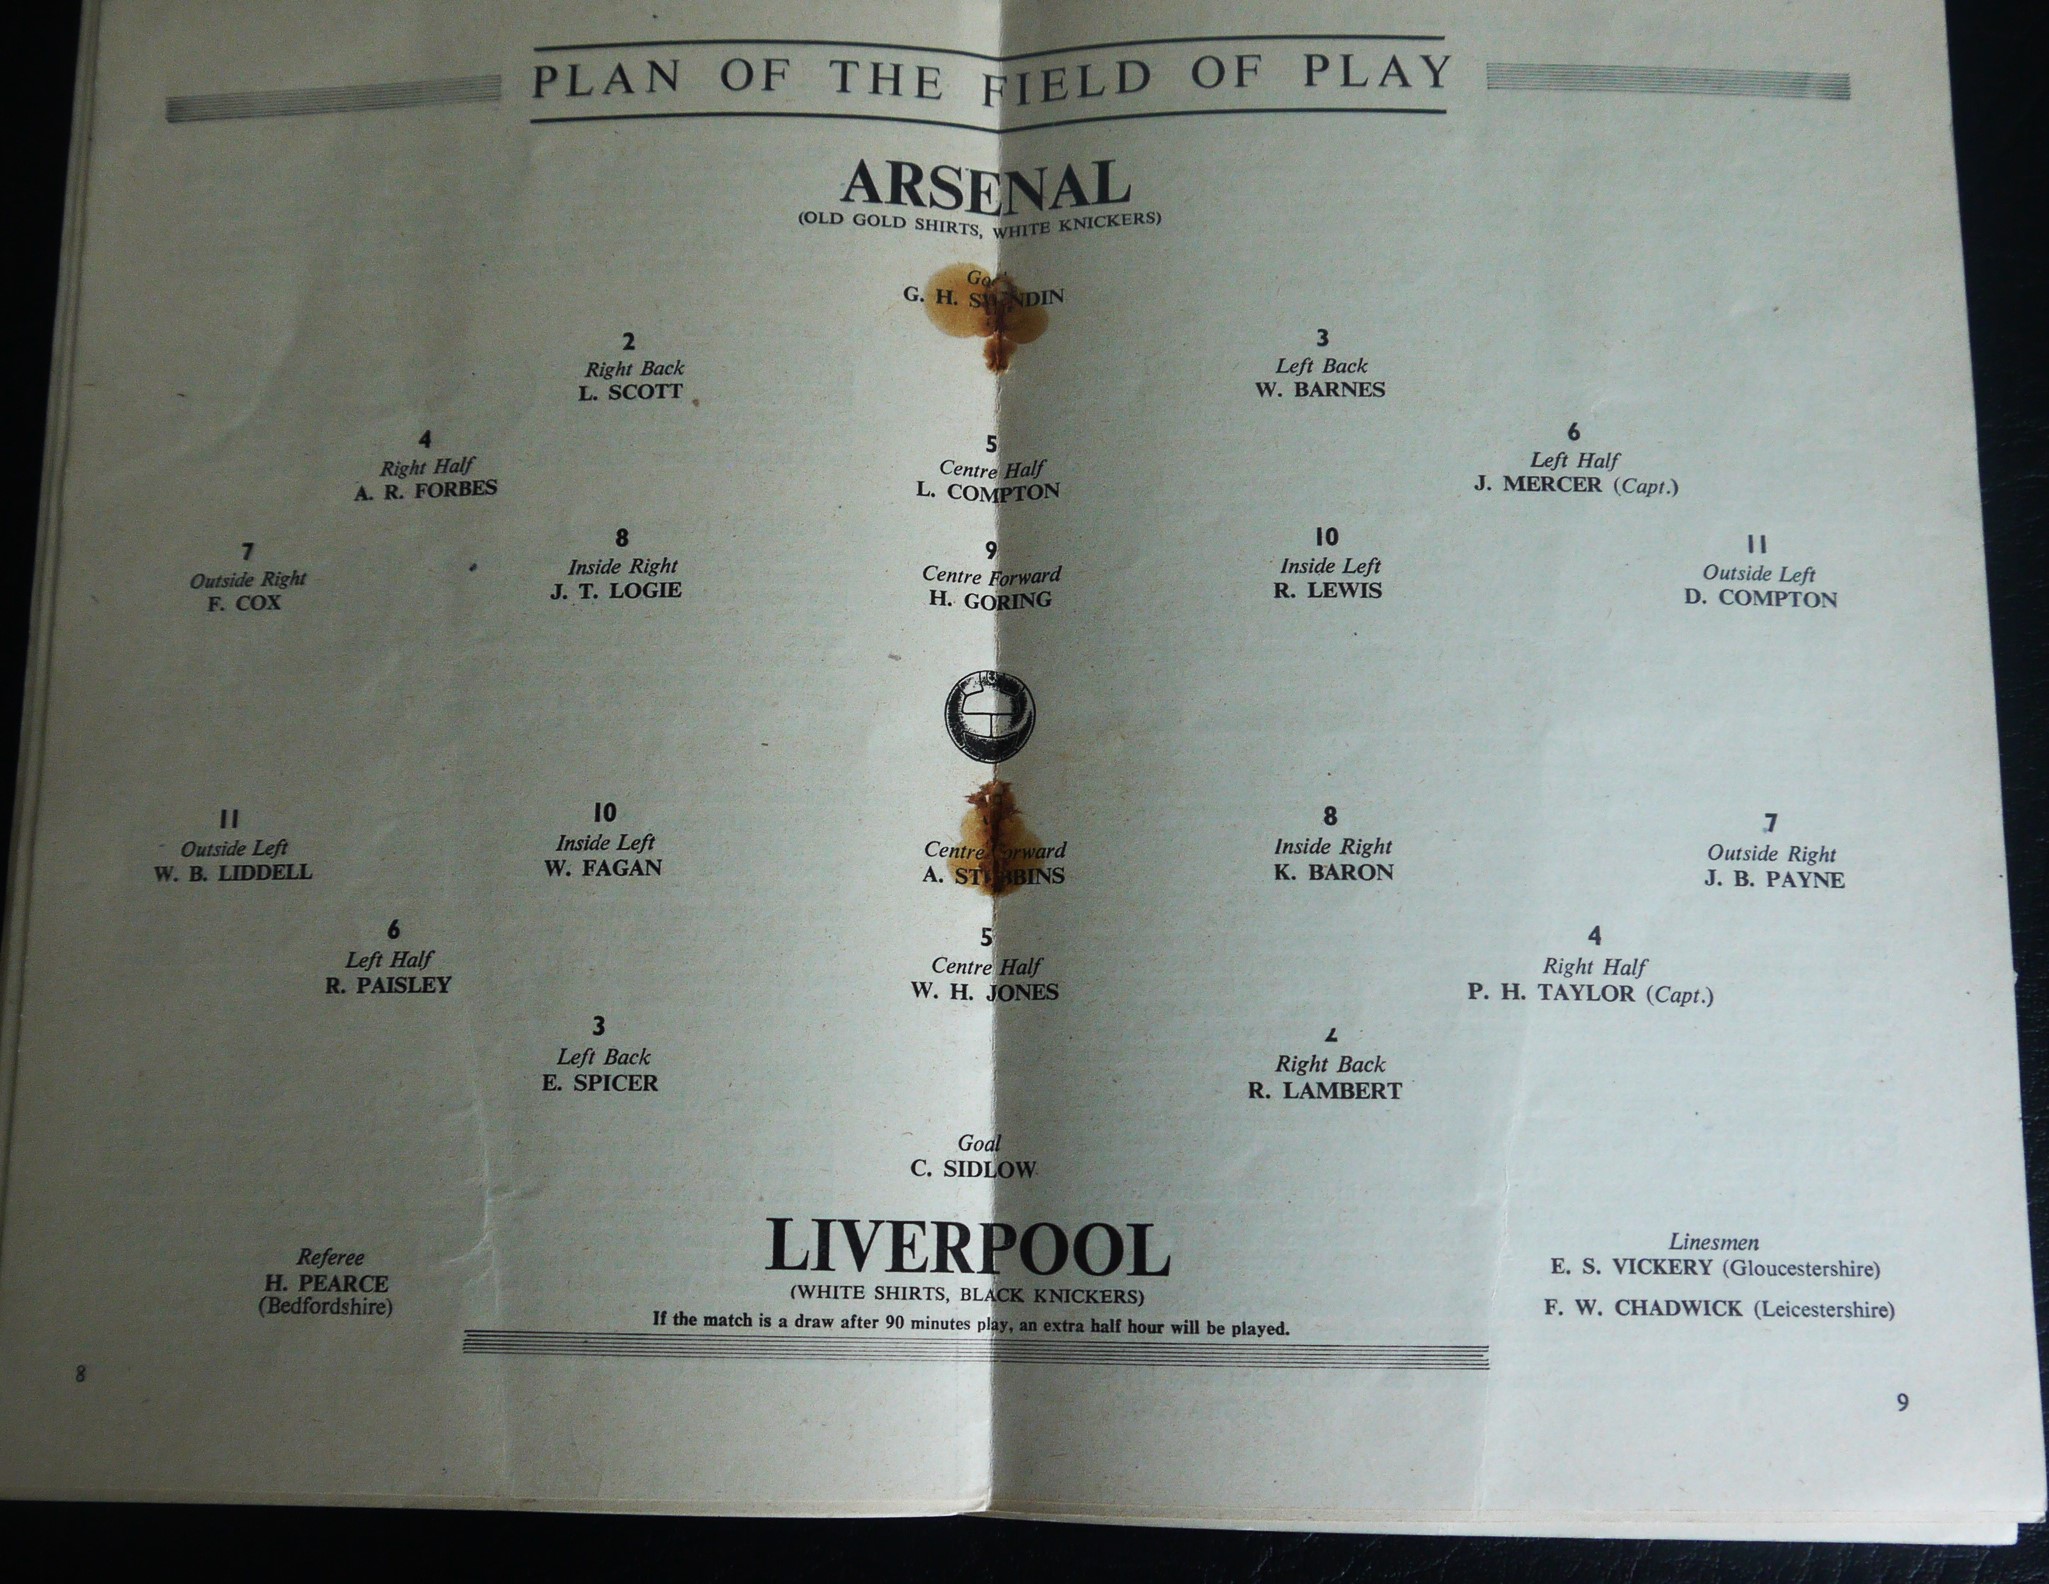 1950 FA CUP FINAL ARSENAL V LIVERPOOL OFFICIAL PROGRAMME - Image 2 of 2